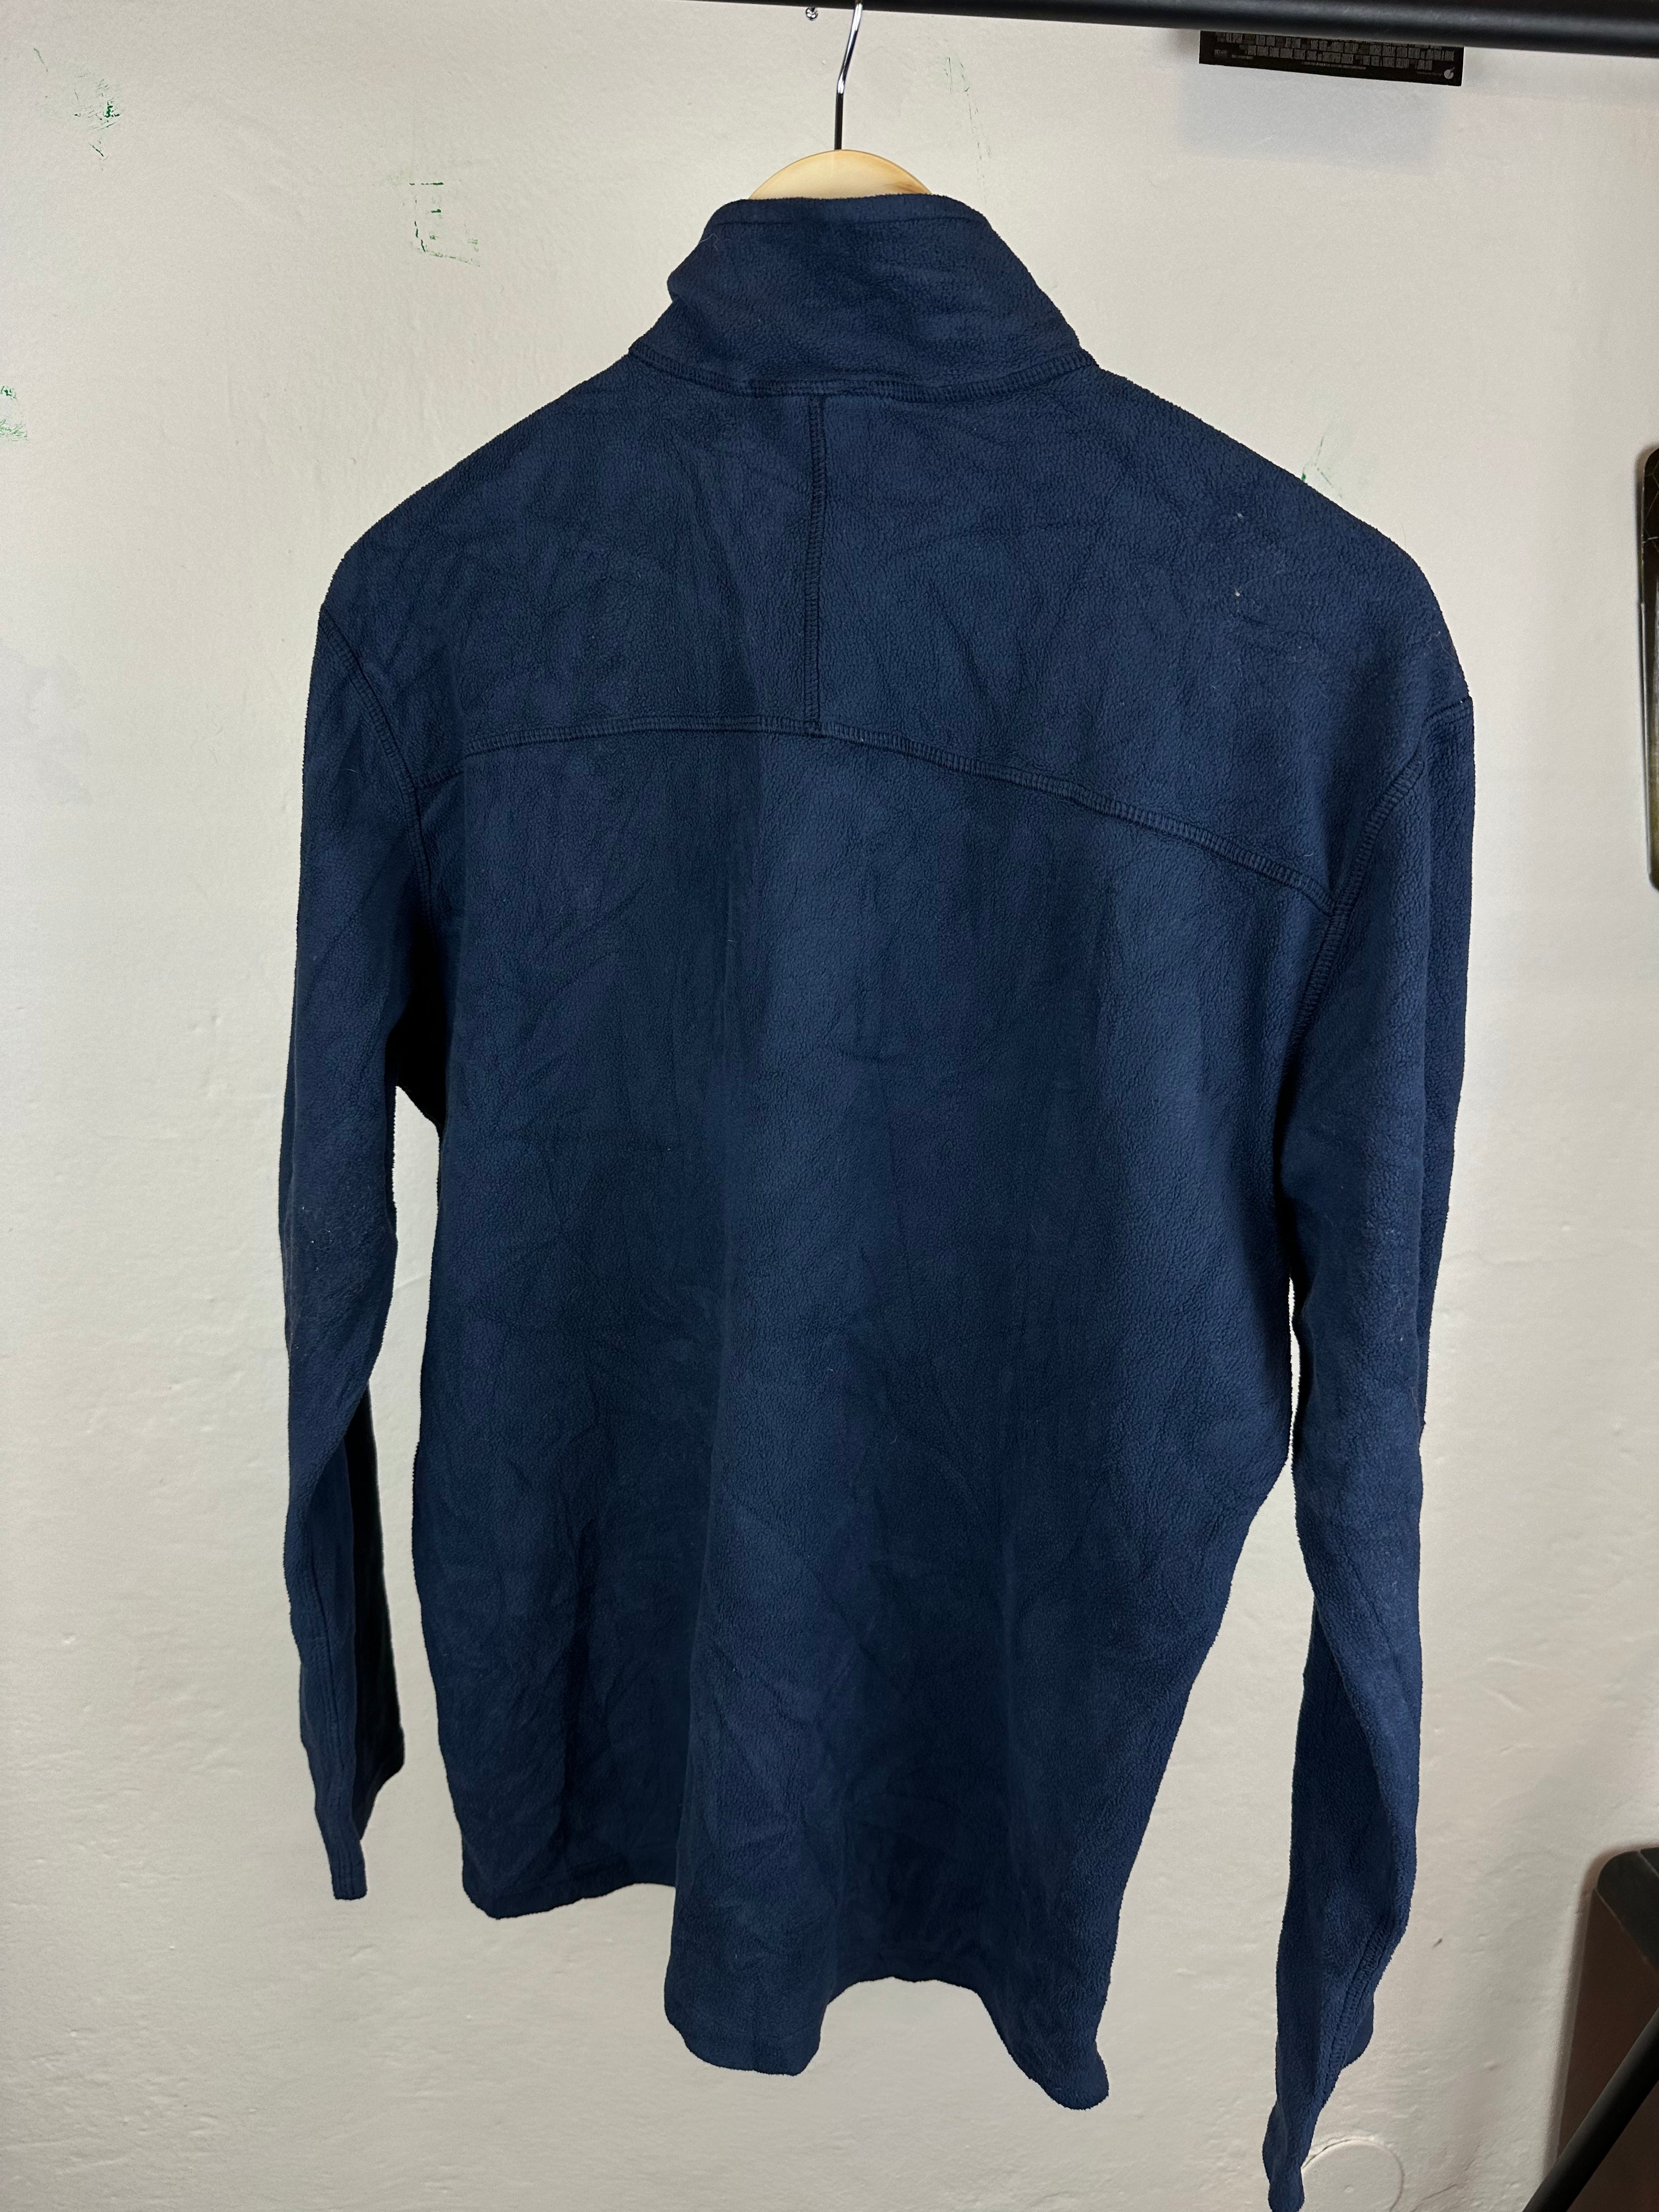 The North Face Fleece - size M